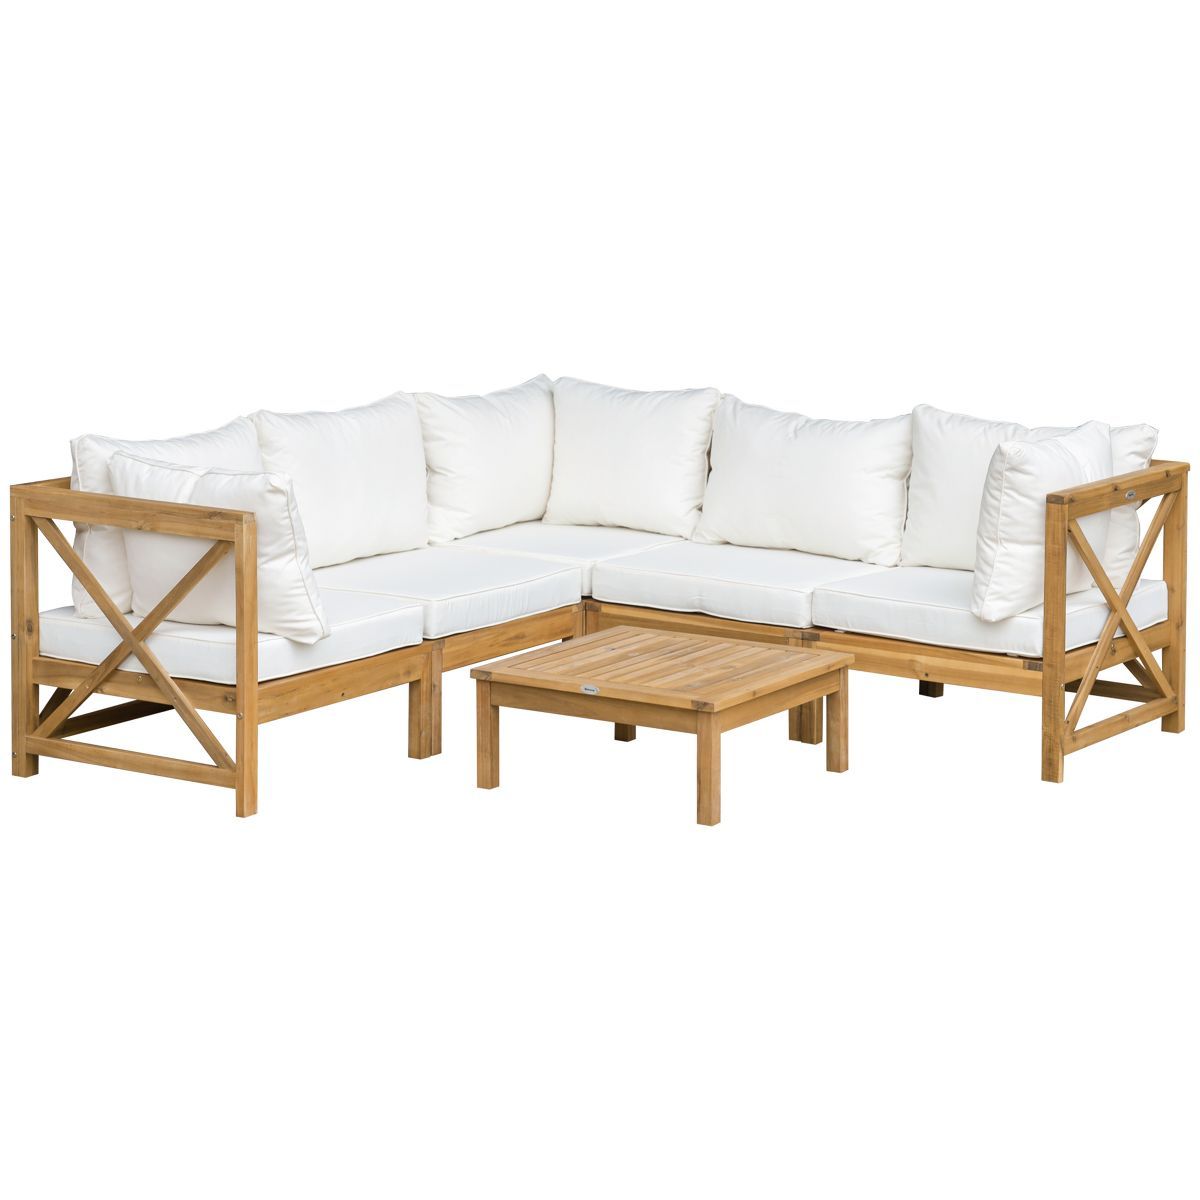 Outsunny 6 Piece Wood Patio Furniture Set, Outdoor Sectional Sofa with Cushions and Coffee Table,... | Target